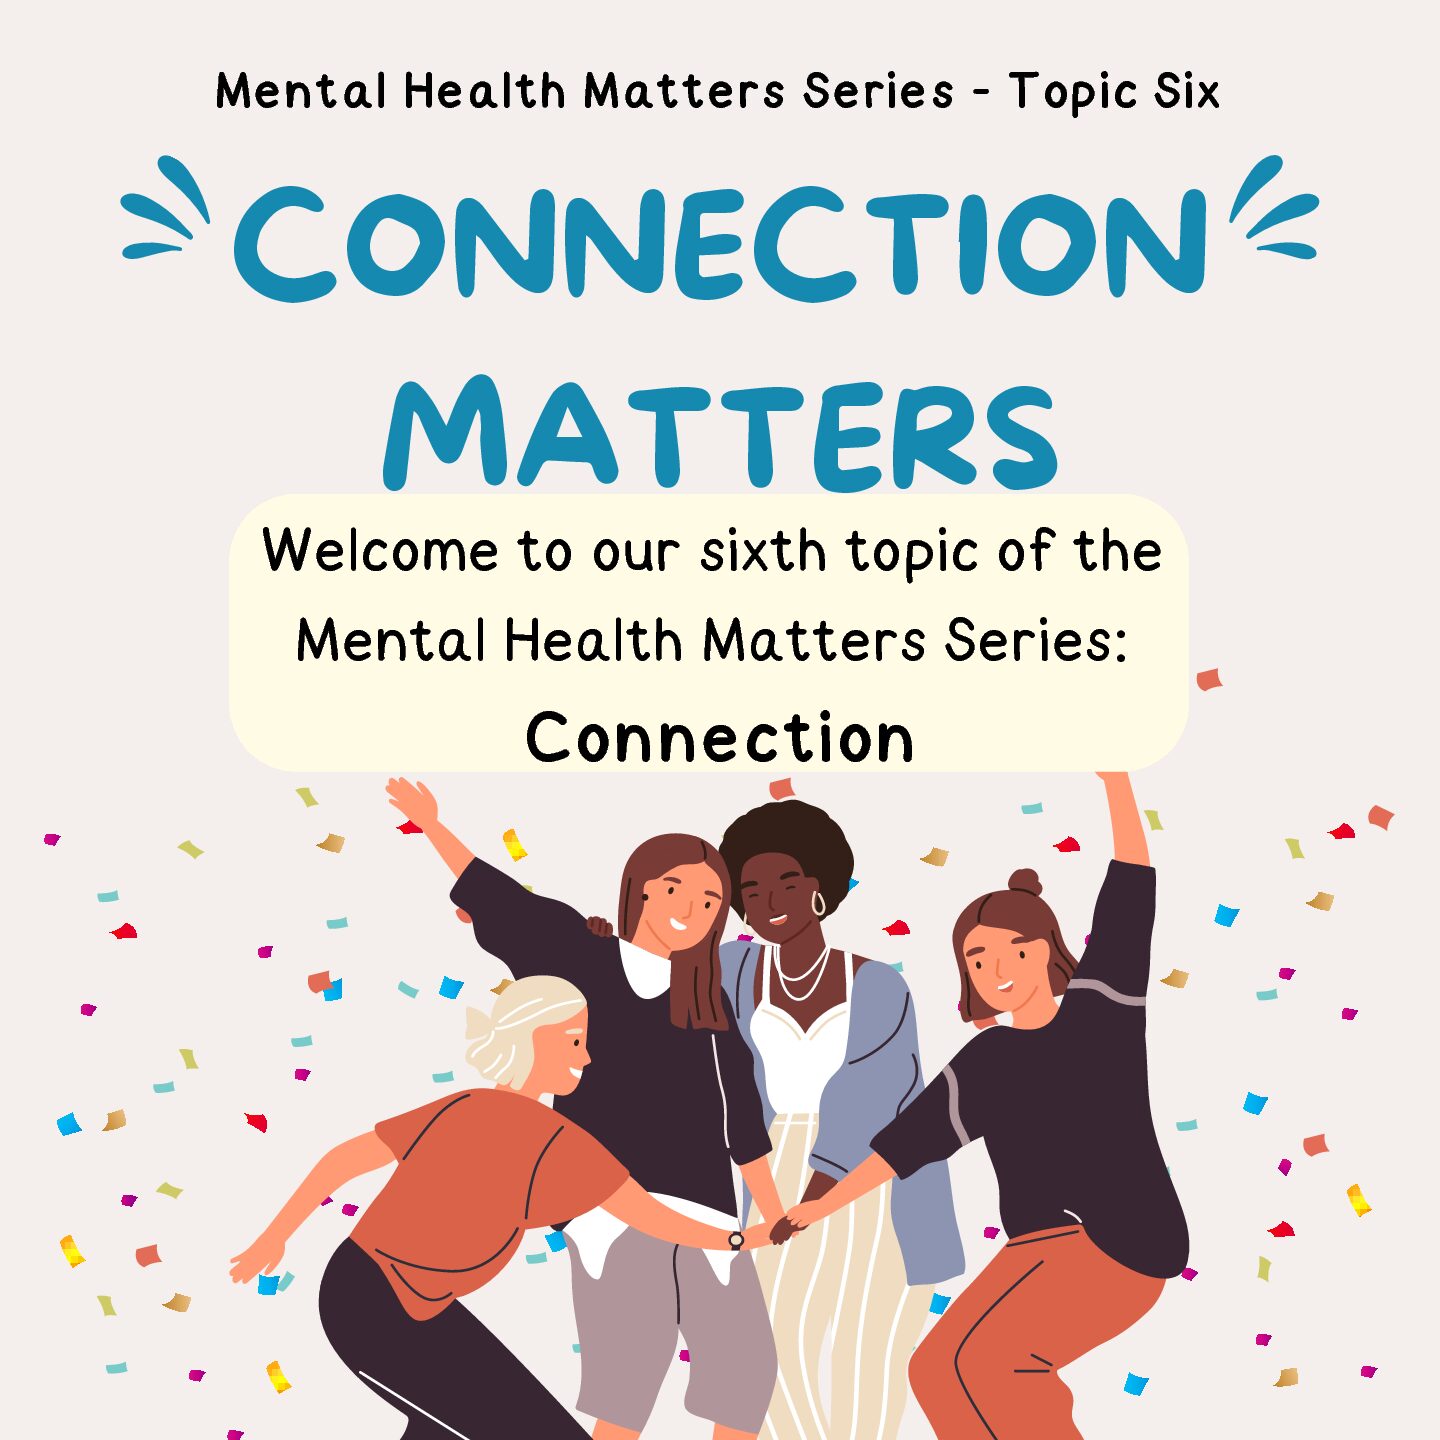 Mental Health Matters Series: Connection Matters